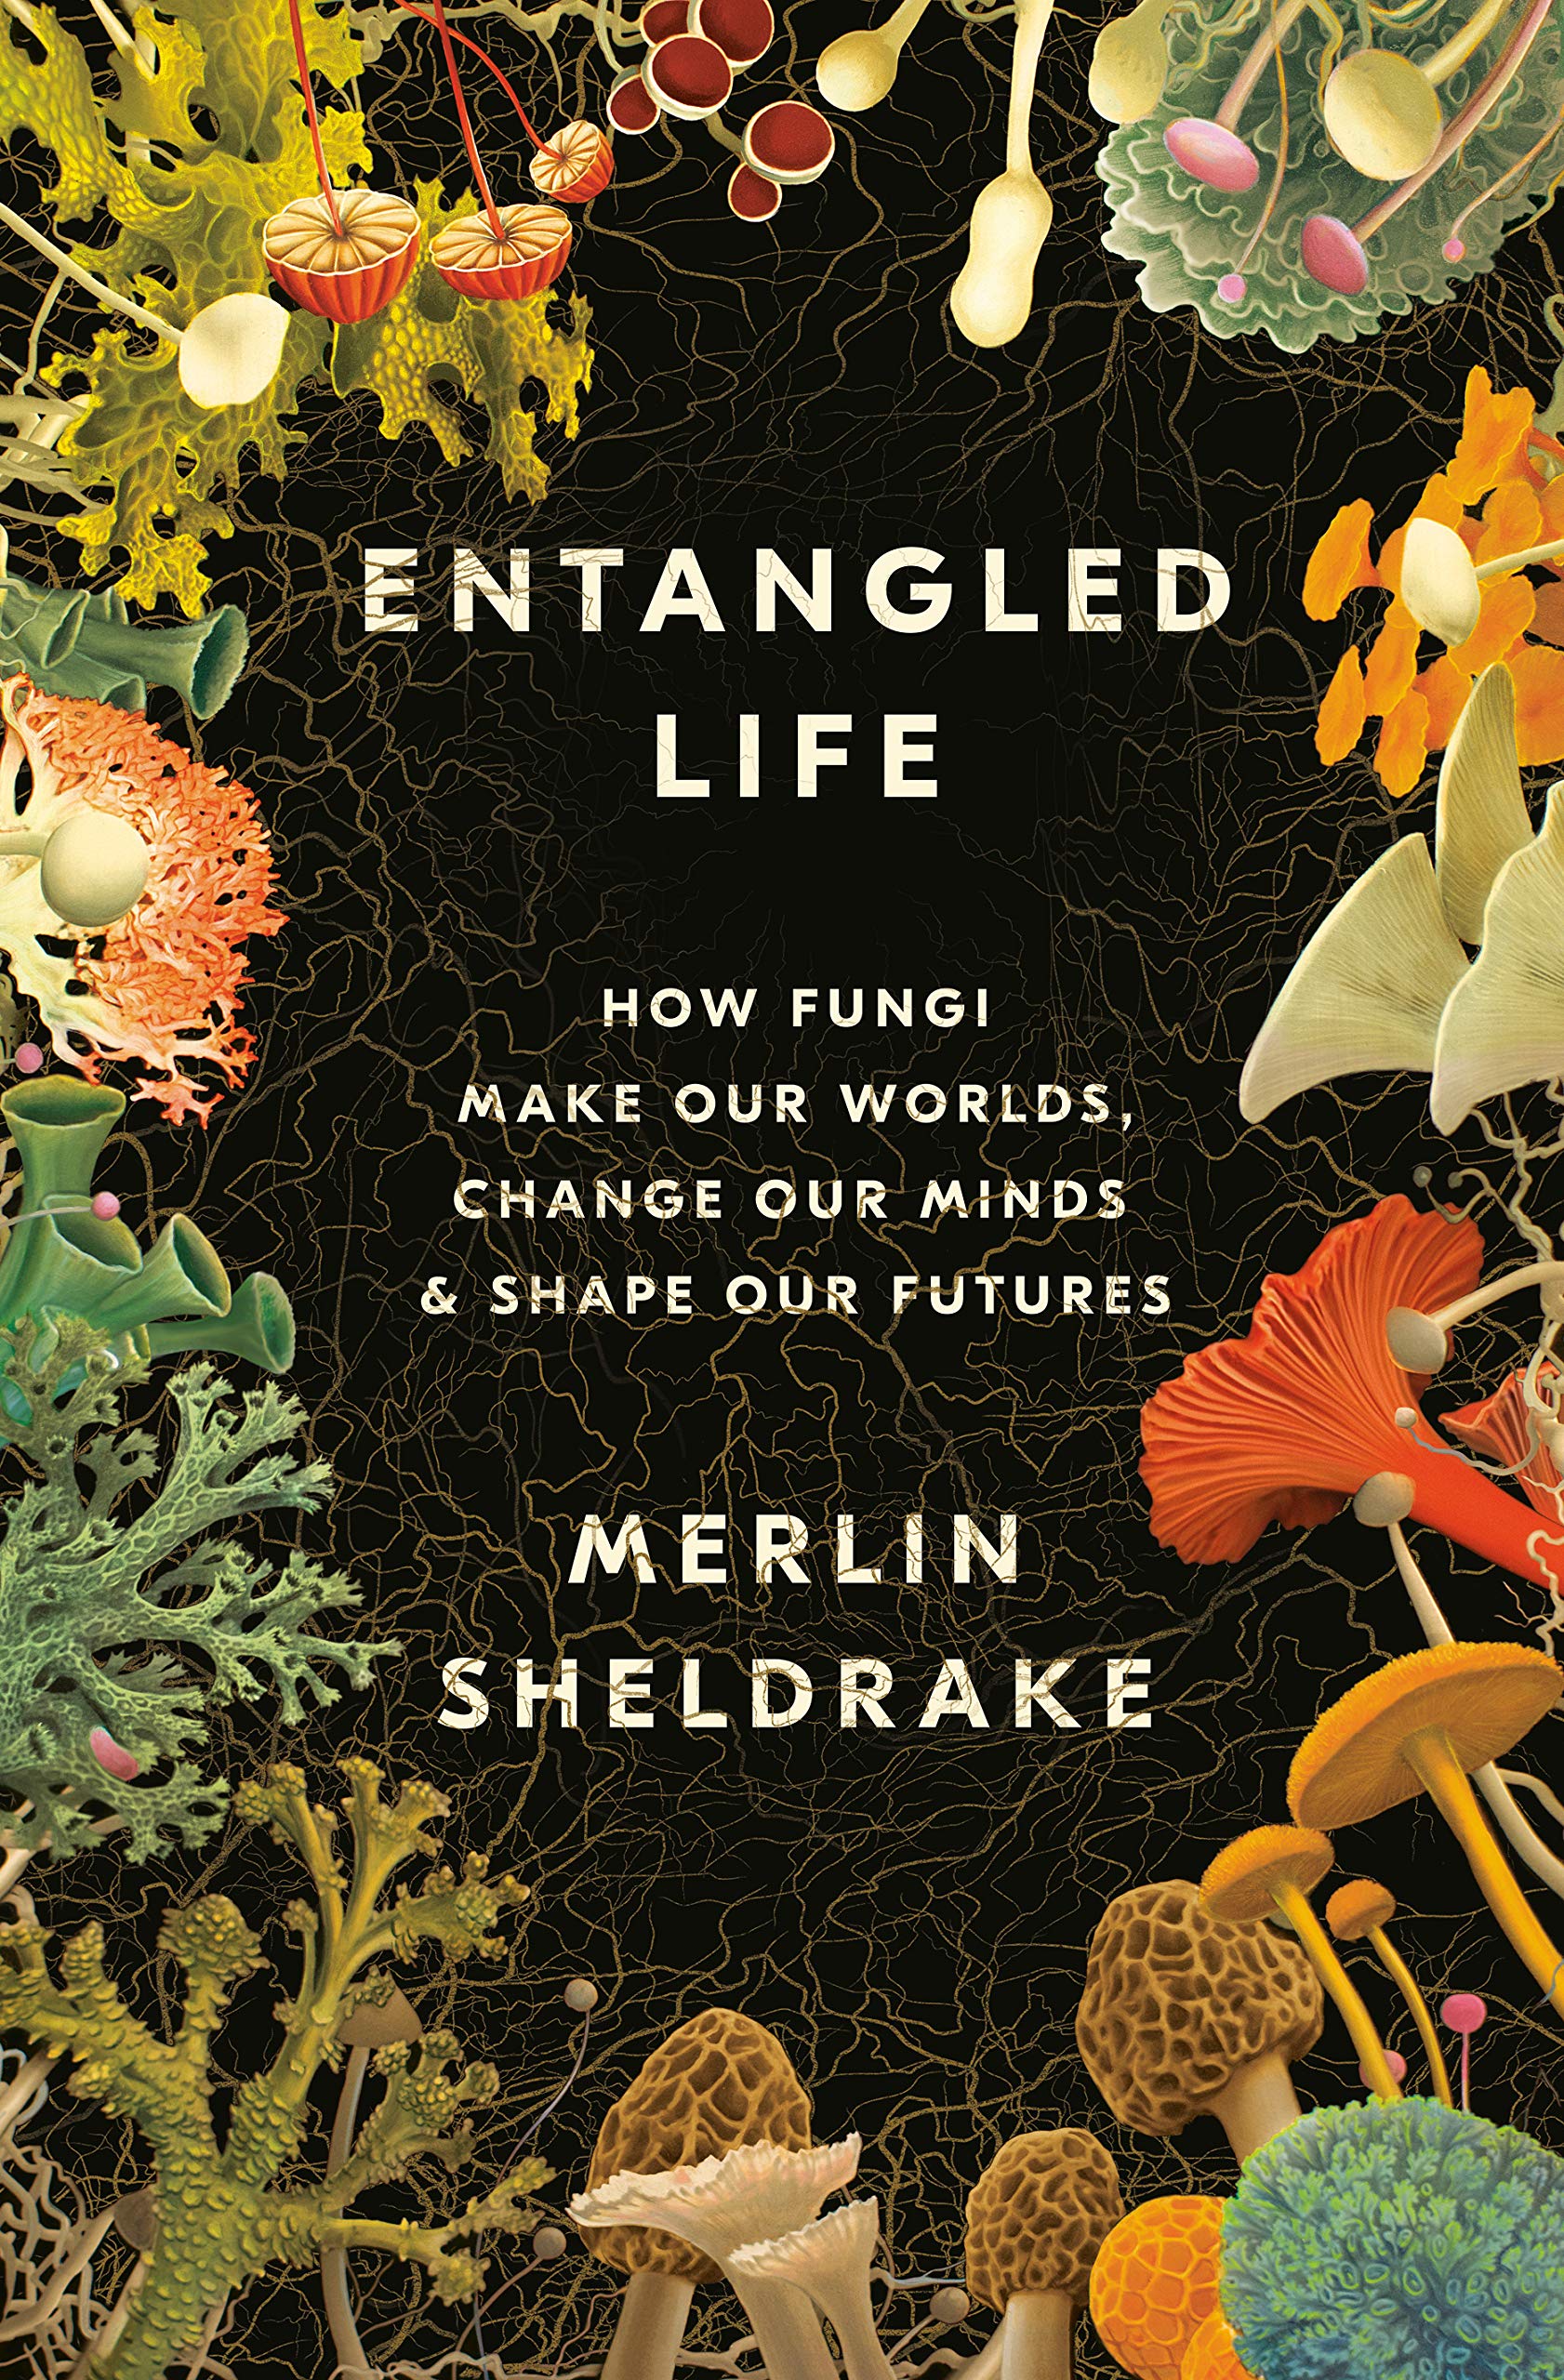 Merlin Sheldrake: Entangled Life: How Fungi Make Our Worlds, Change Our Minds & Shape Our Futures (2020)